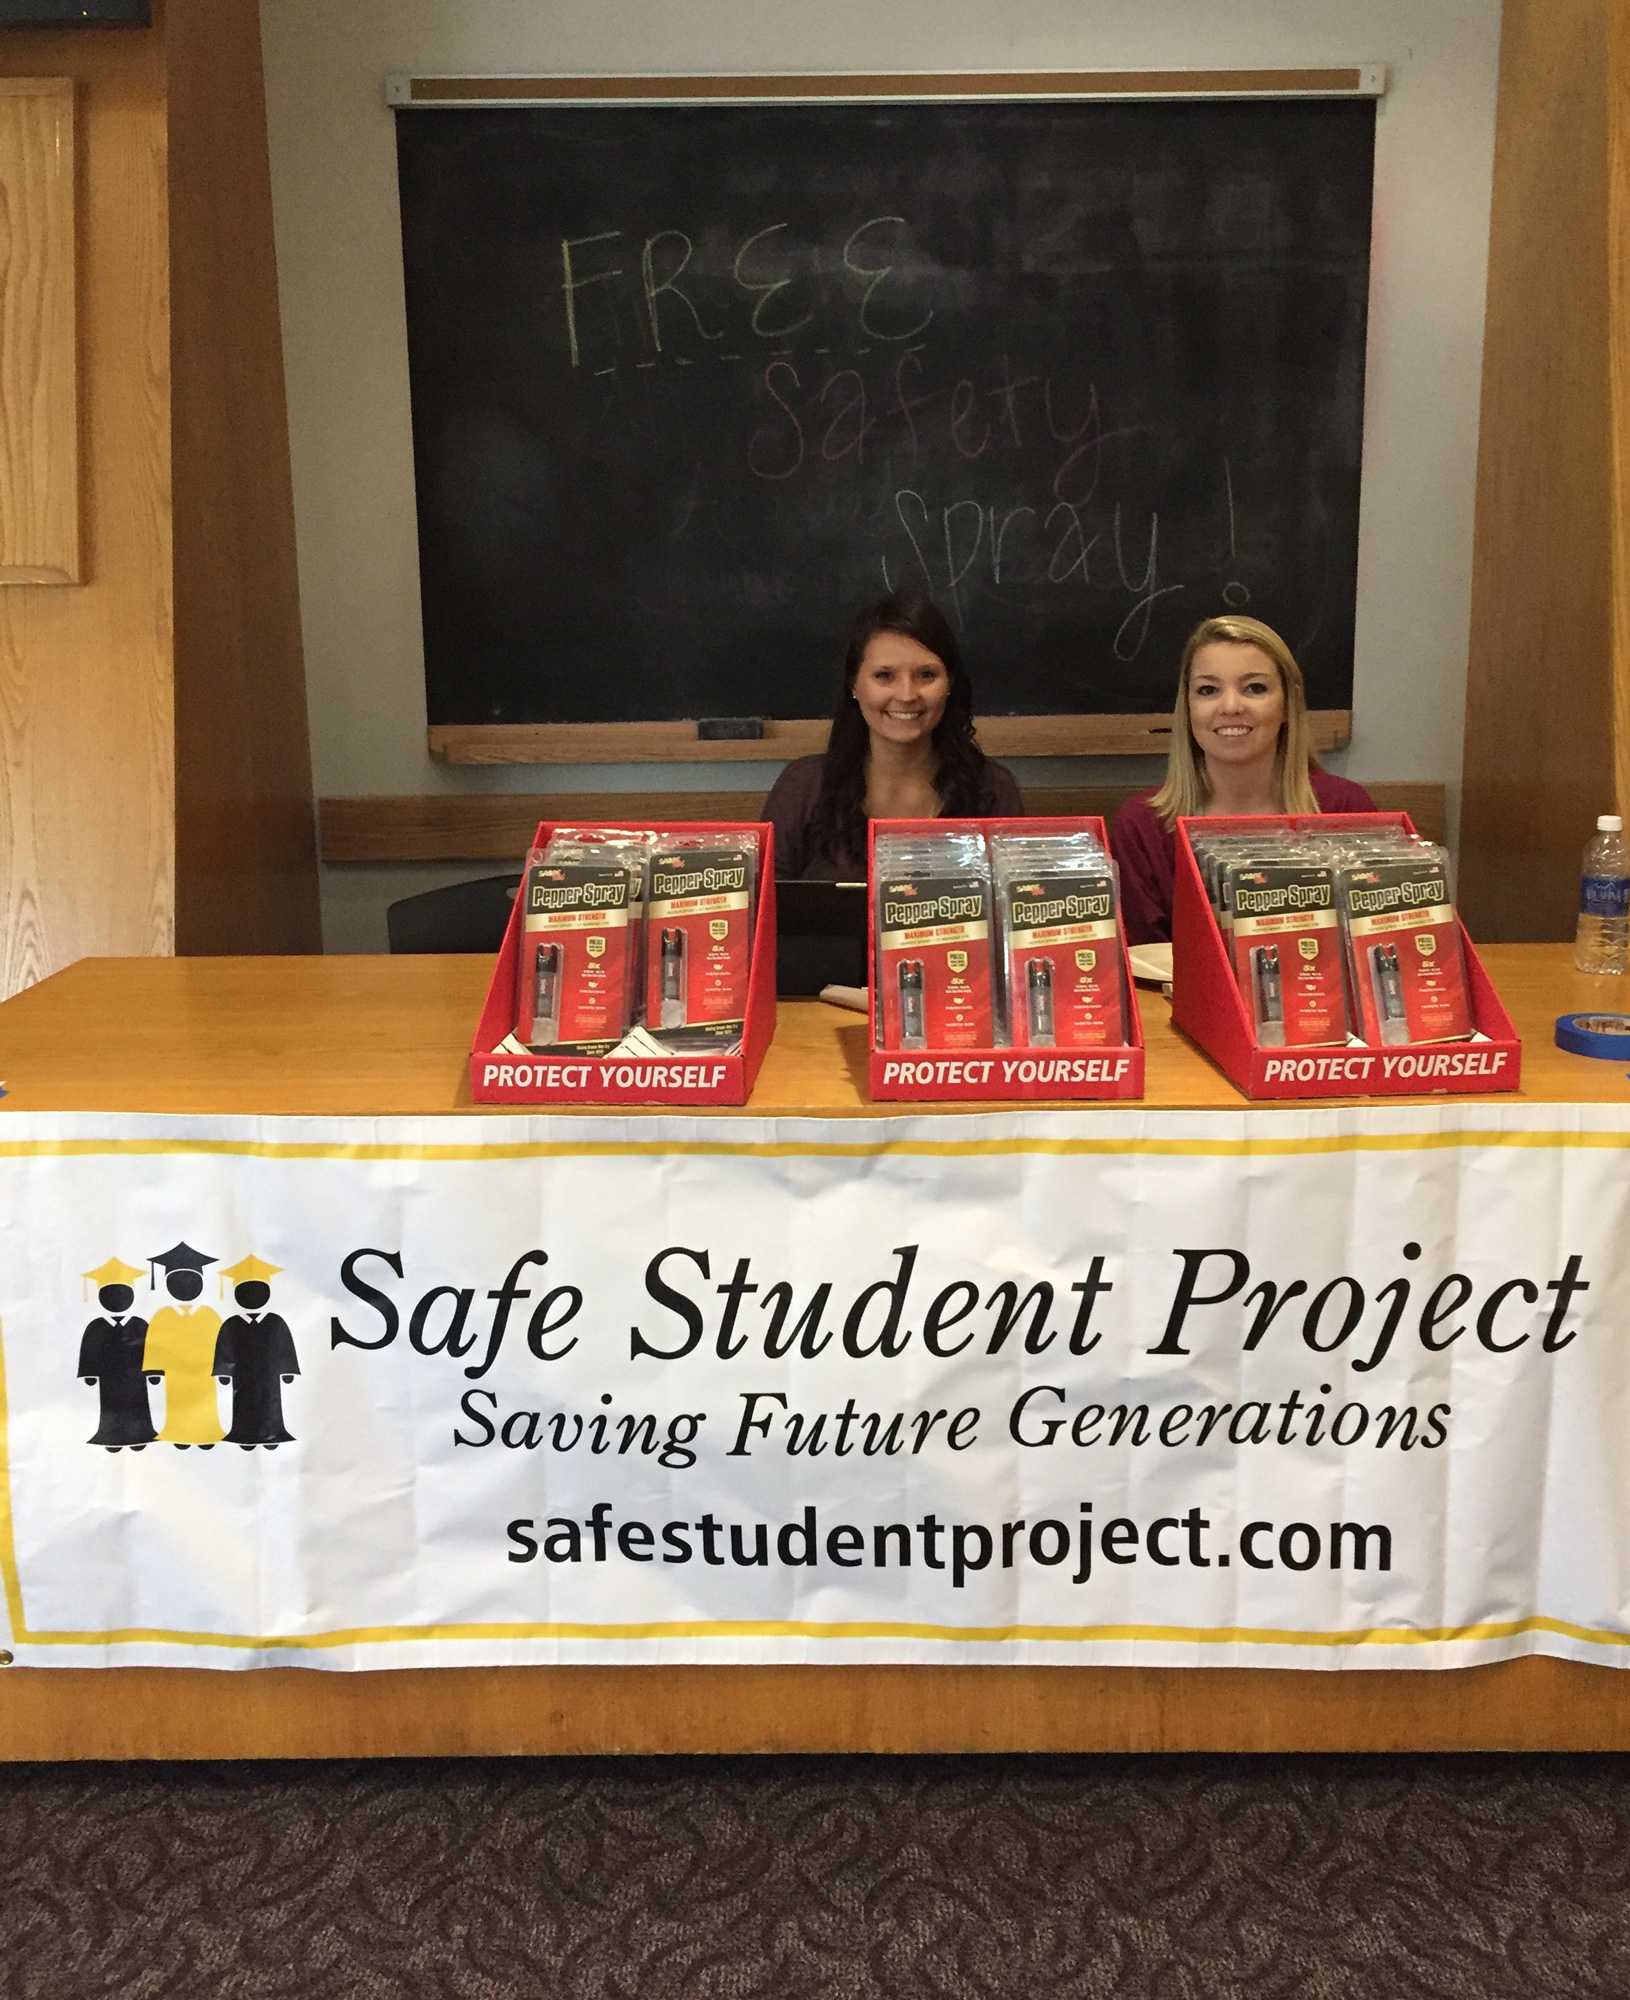 Kristen Howell and Sara Bailey of the Safe Student Project with some of the pepper spray they give out for free at the project’s sessions. They give about out 30-50 units per session and host them at least once a semester. Photo courtesy of Kritsen Howell.